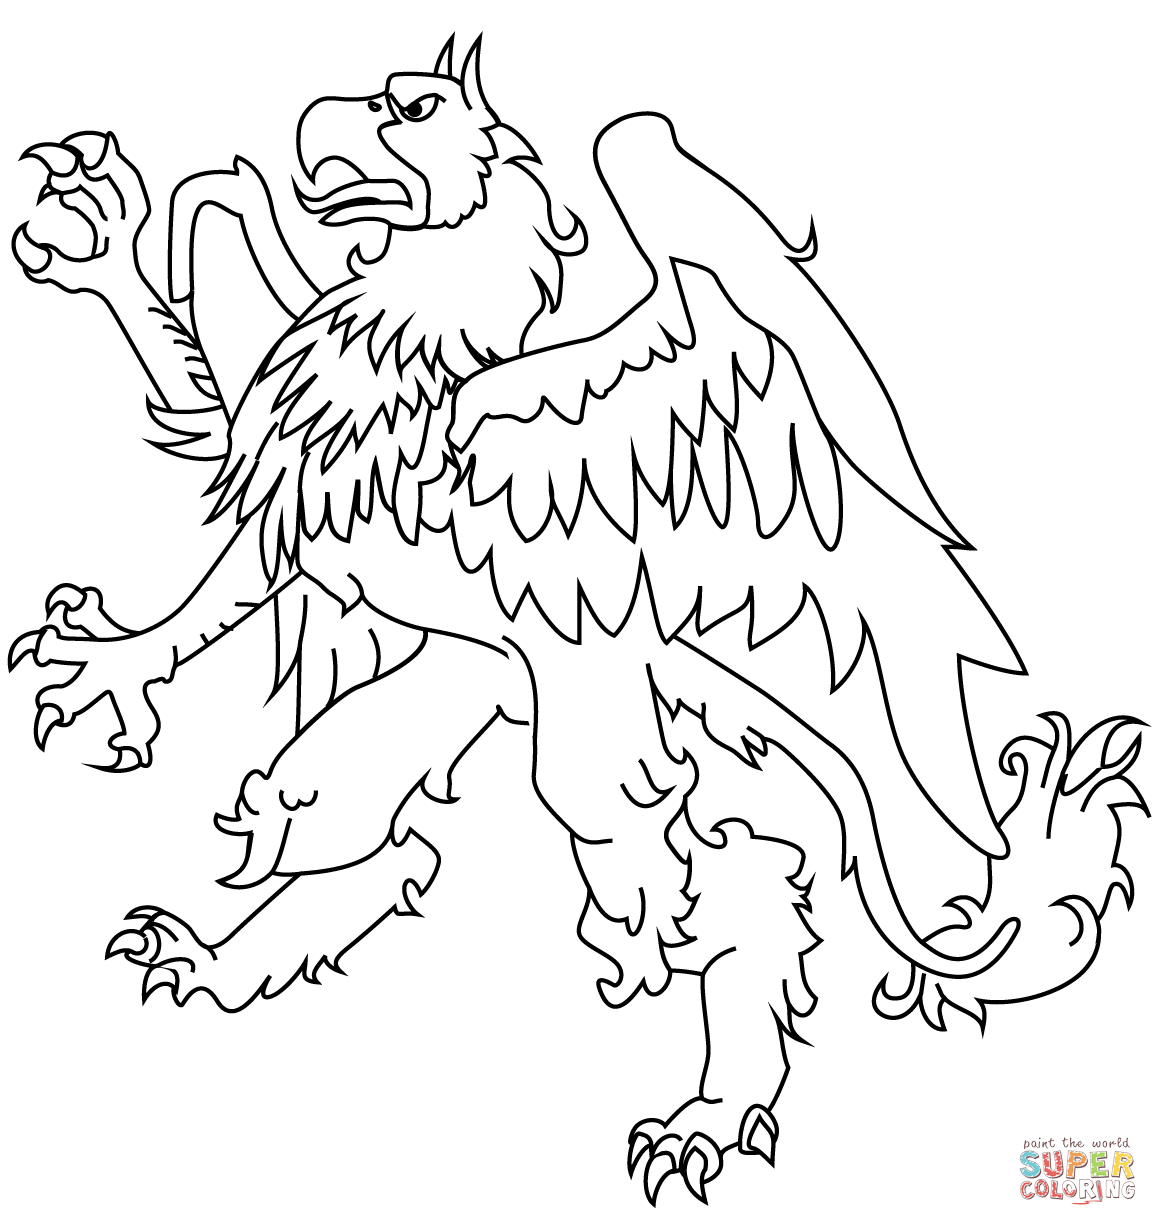 Griffin coloring page free printable coloring pages